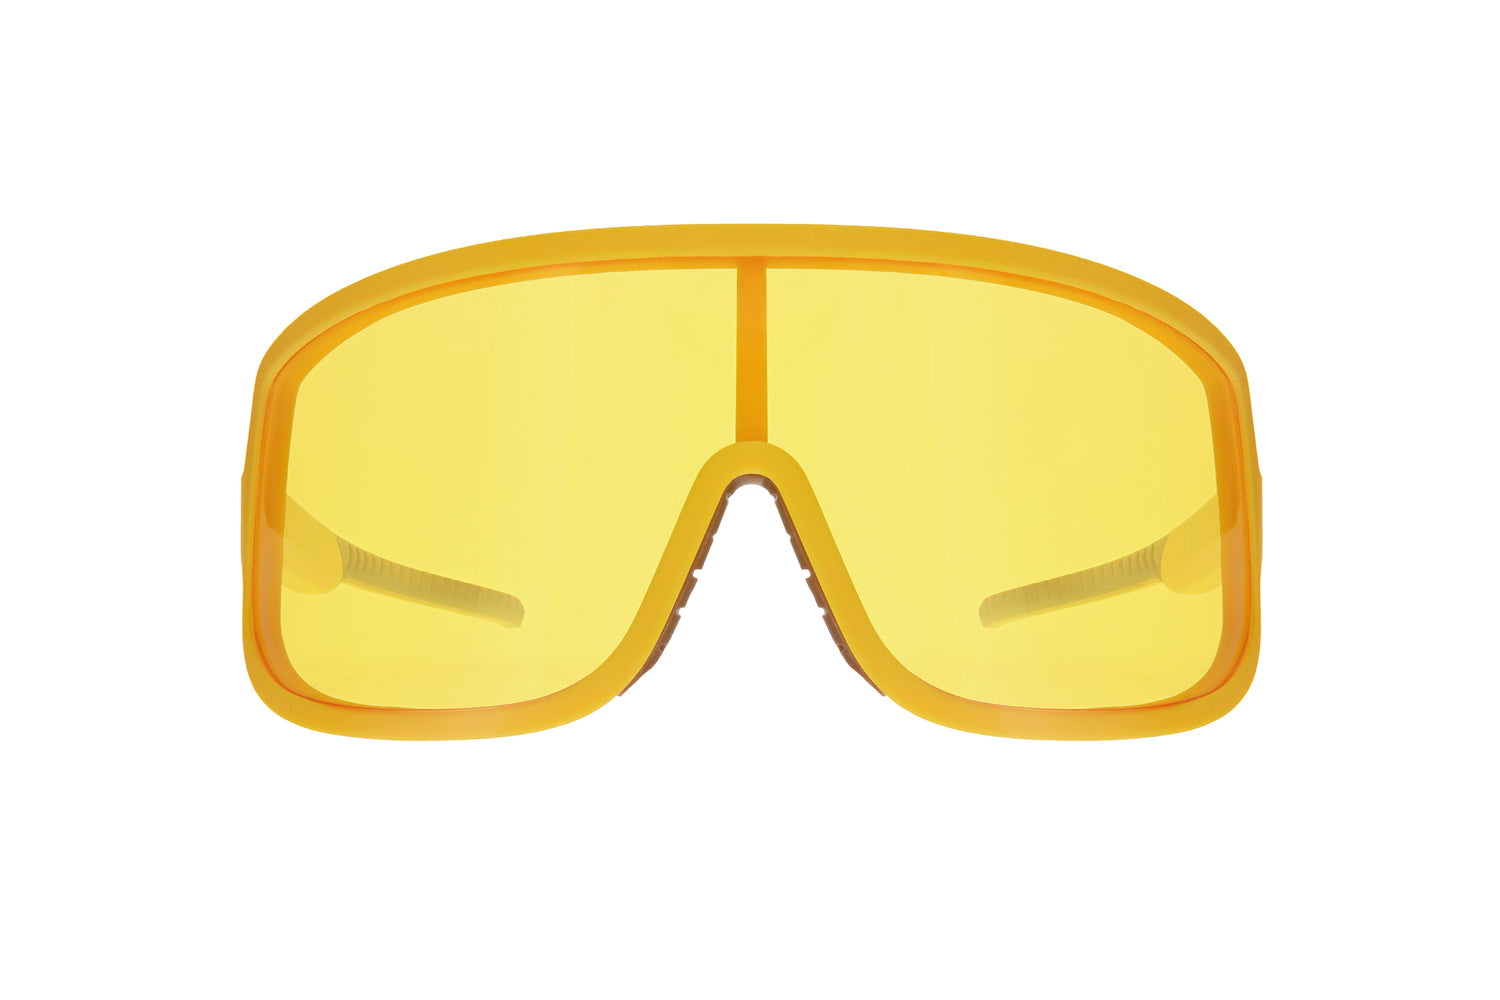 goodr Wrap G Sunglasses - These Shades Are Bananas